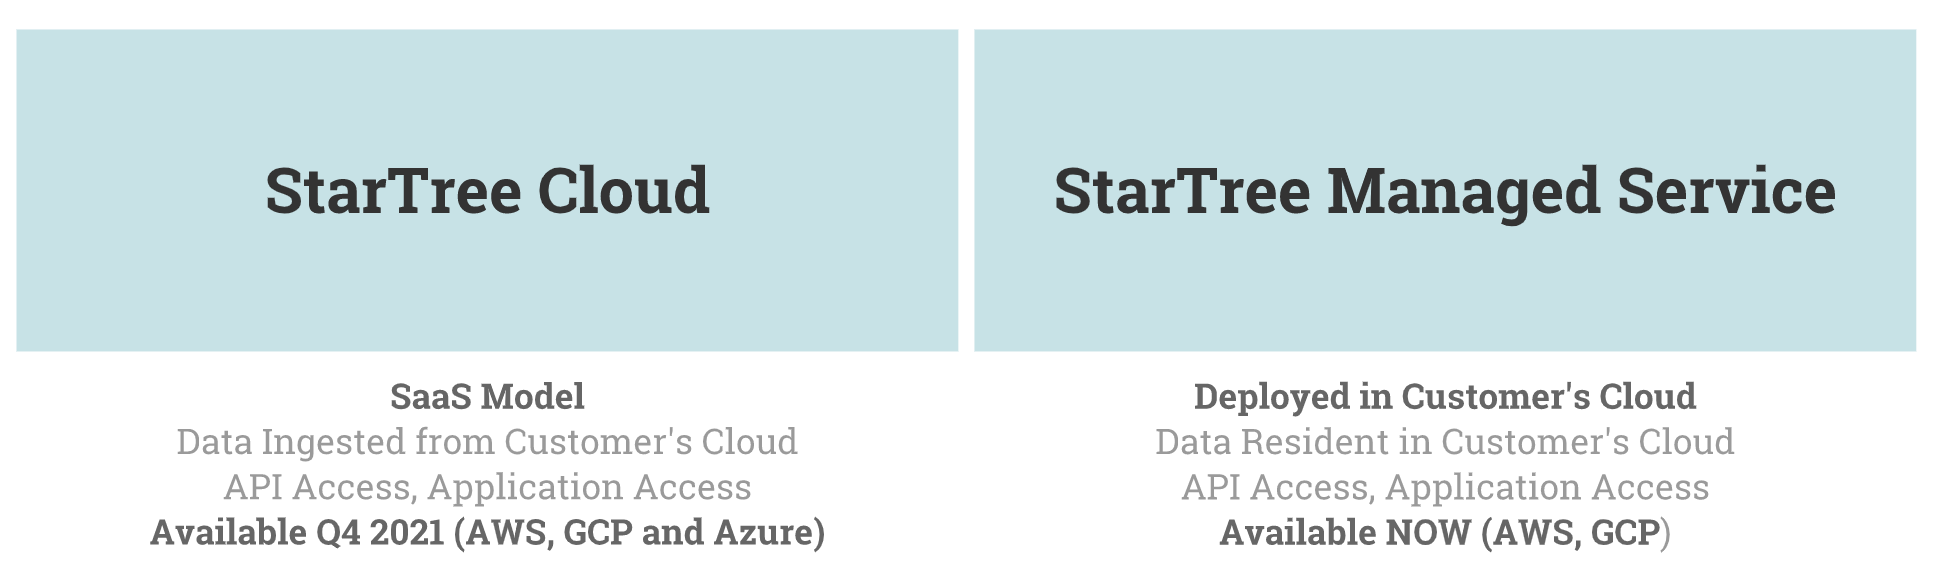 Overview of StarTree Cloud’s first deployment models in 2021 including SaaS and BYOC